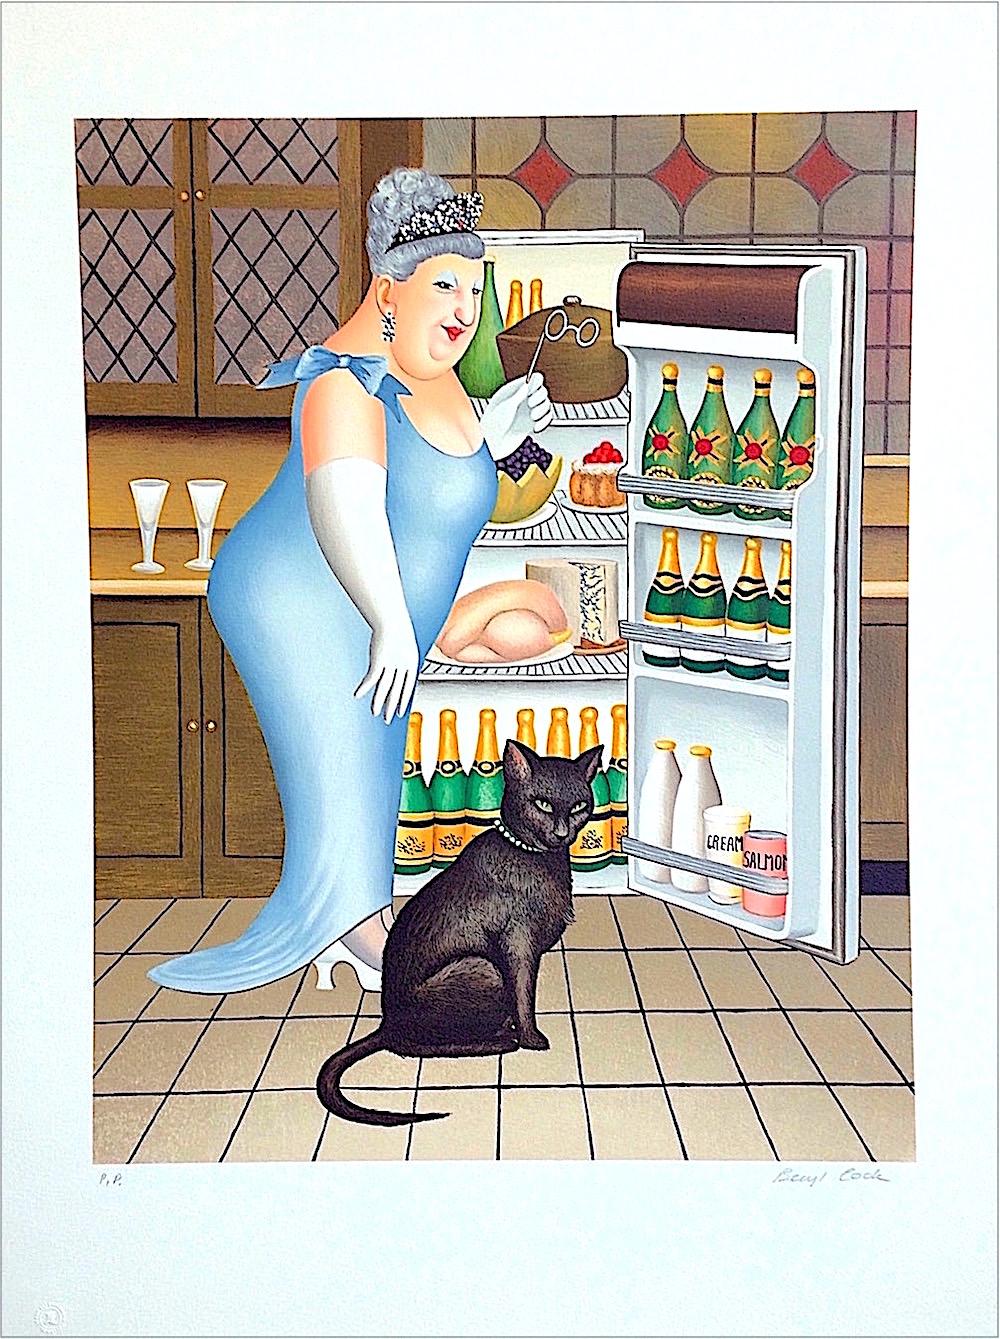 PERCY AT THE FRIDGE Signed Lithograph, Black Cat, Champagne, British Humor - Print by Beryl Cook